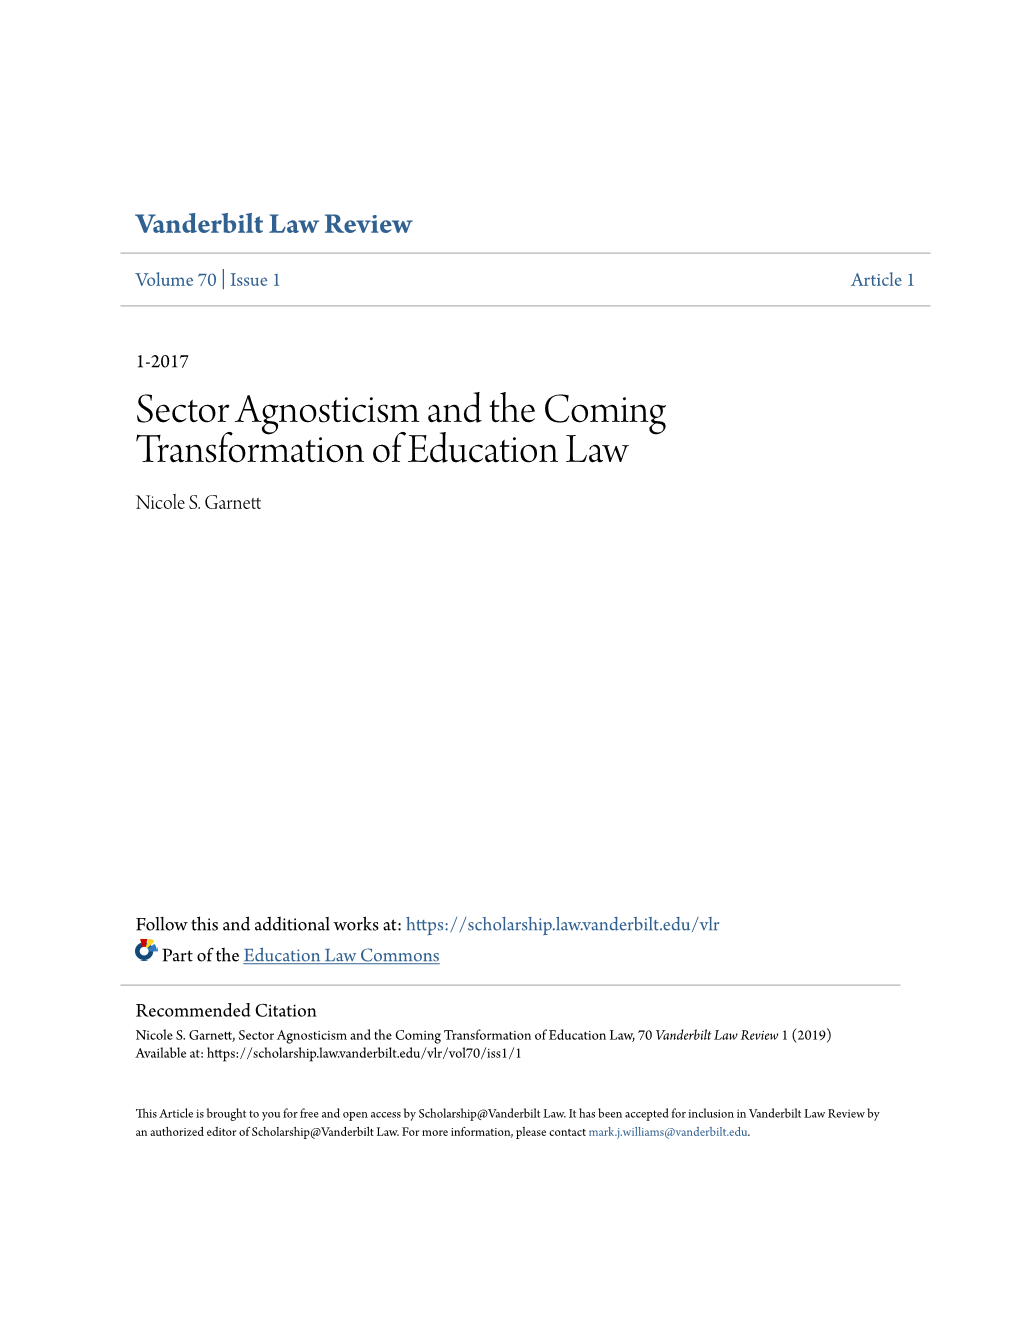 Sector Agnosticism and the Coming Transformation of Education Law Nicole S